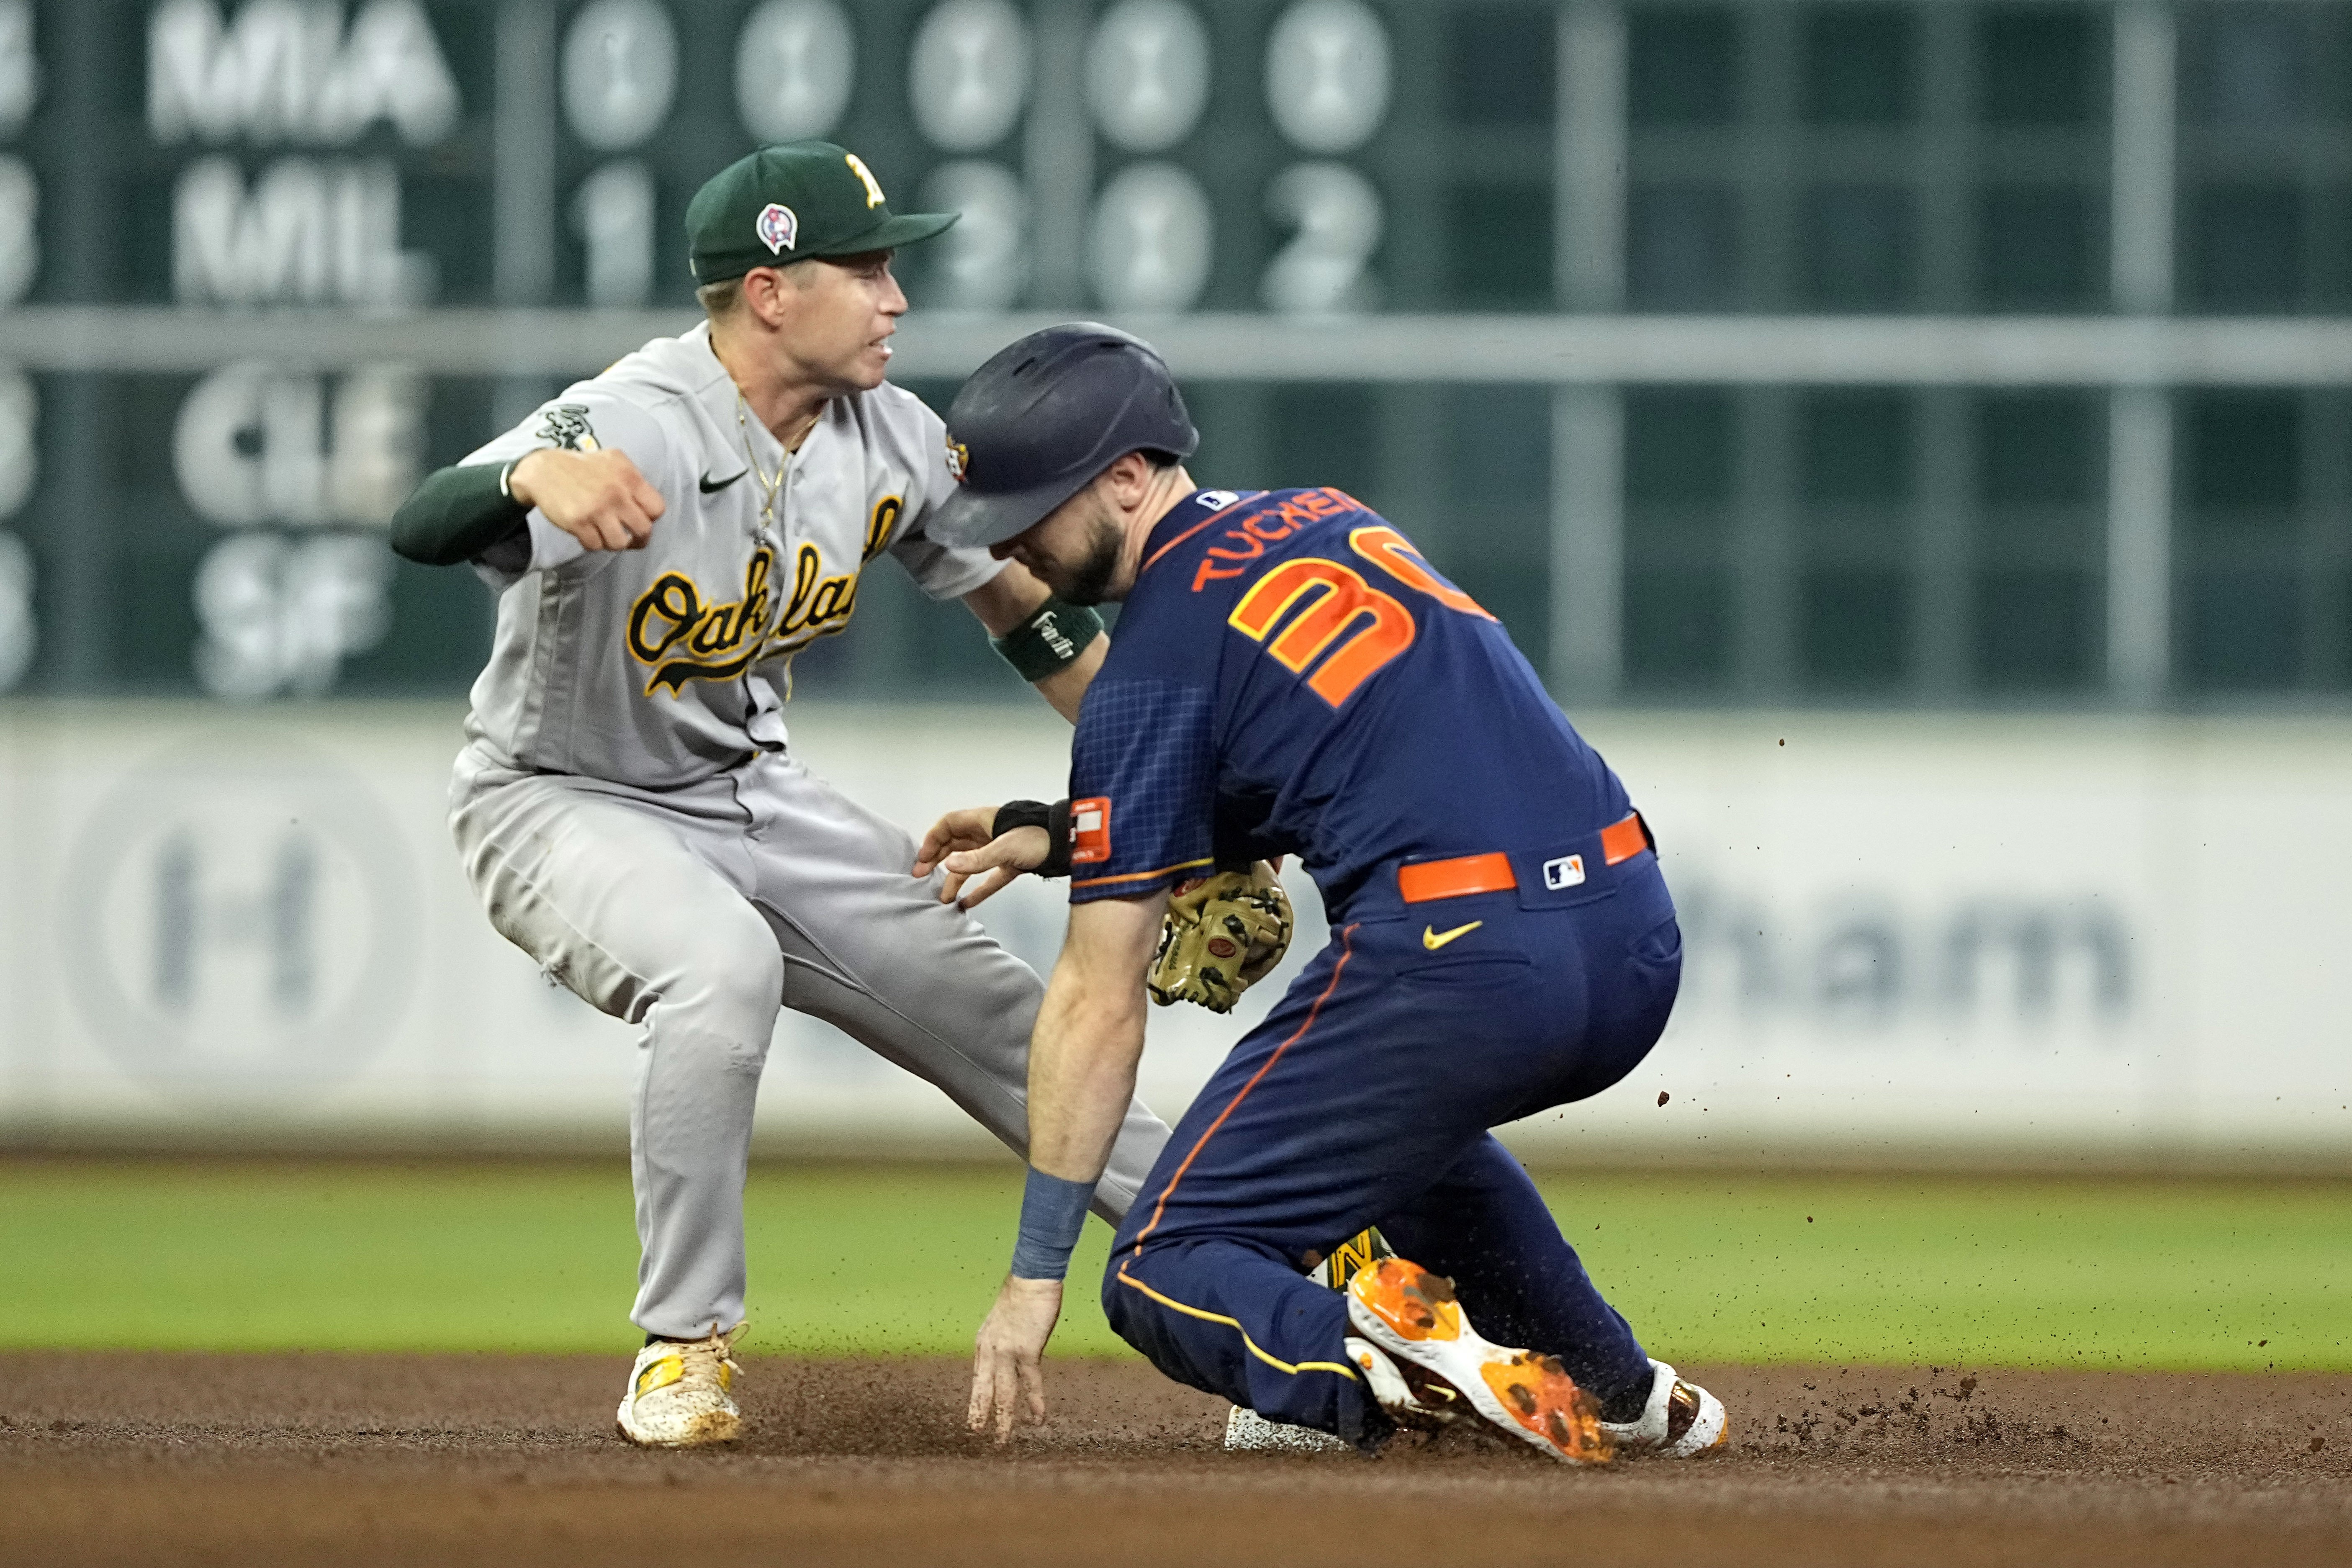 Monday night's A's game in Oakland had smallest crowd since 1979